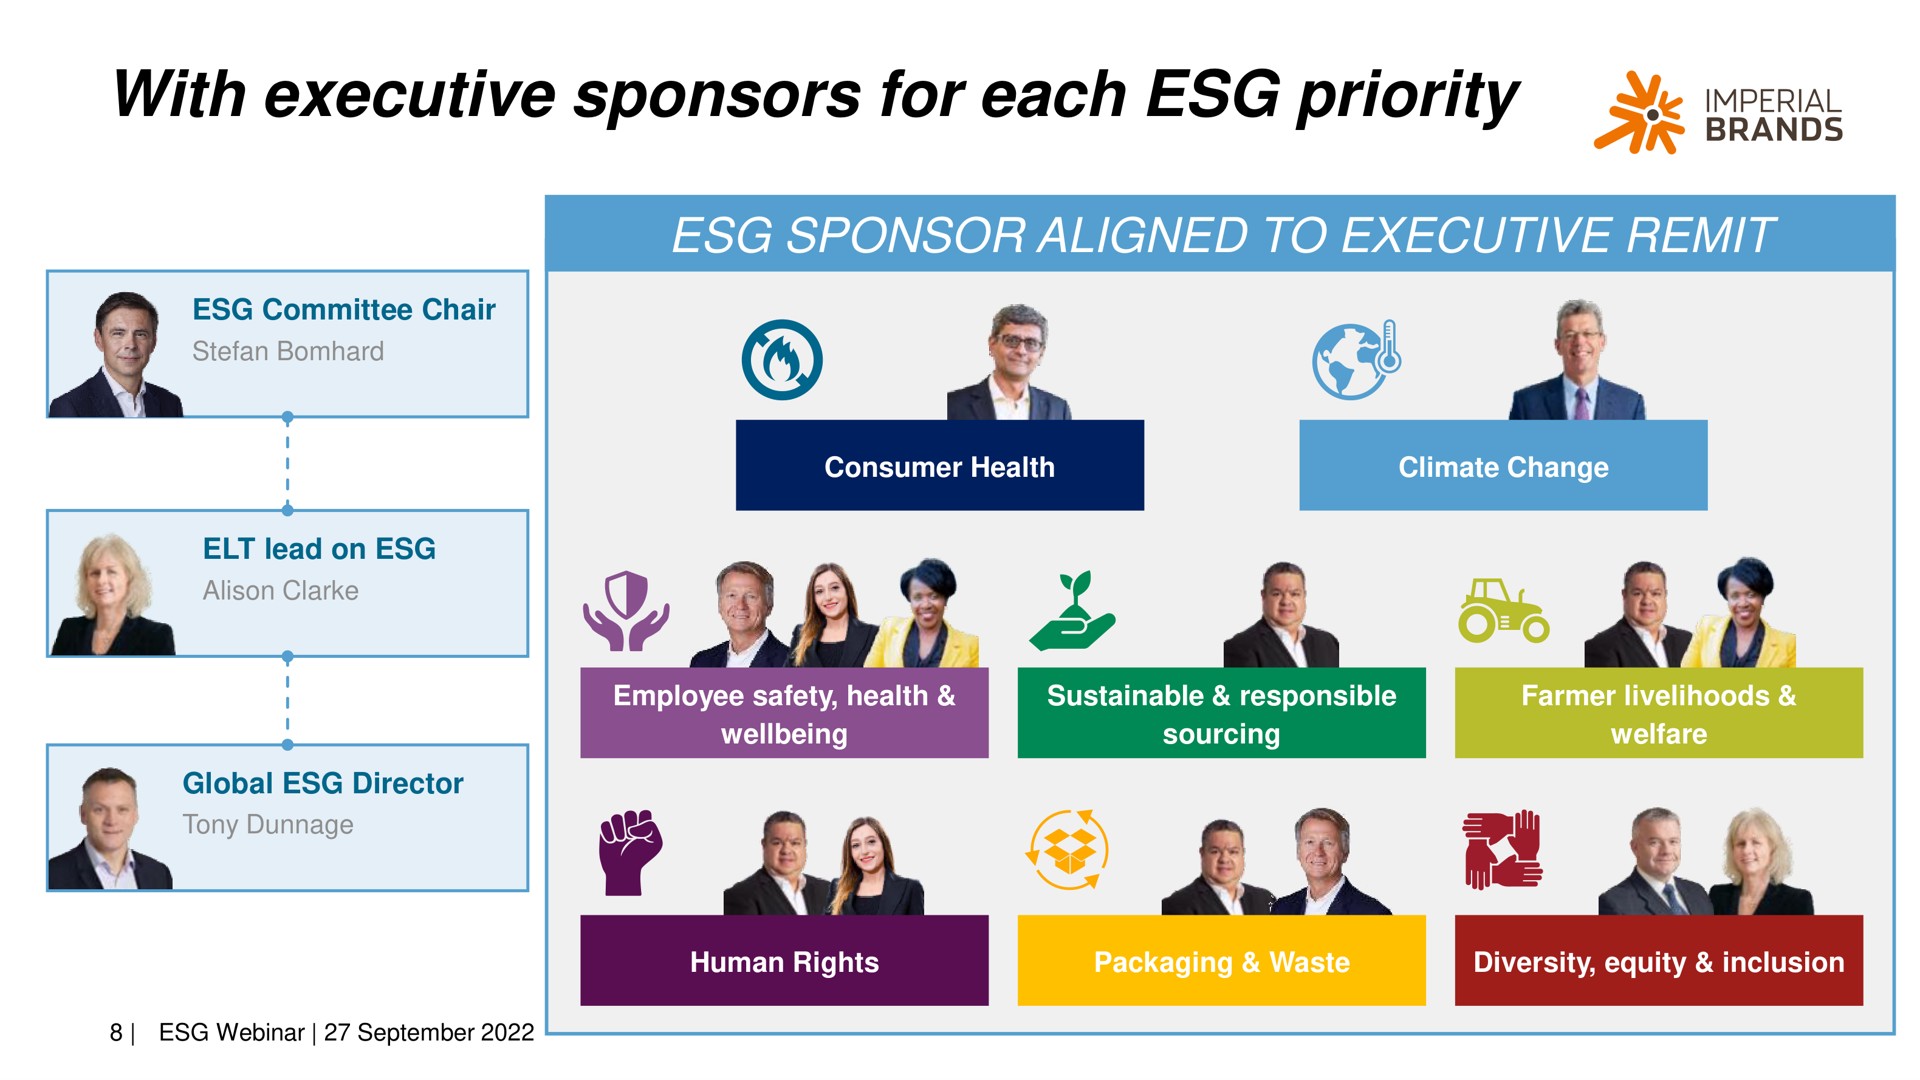 with executive sponsors for each priority sie moral | Imperial Brands